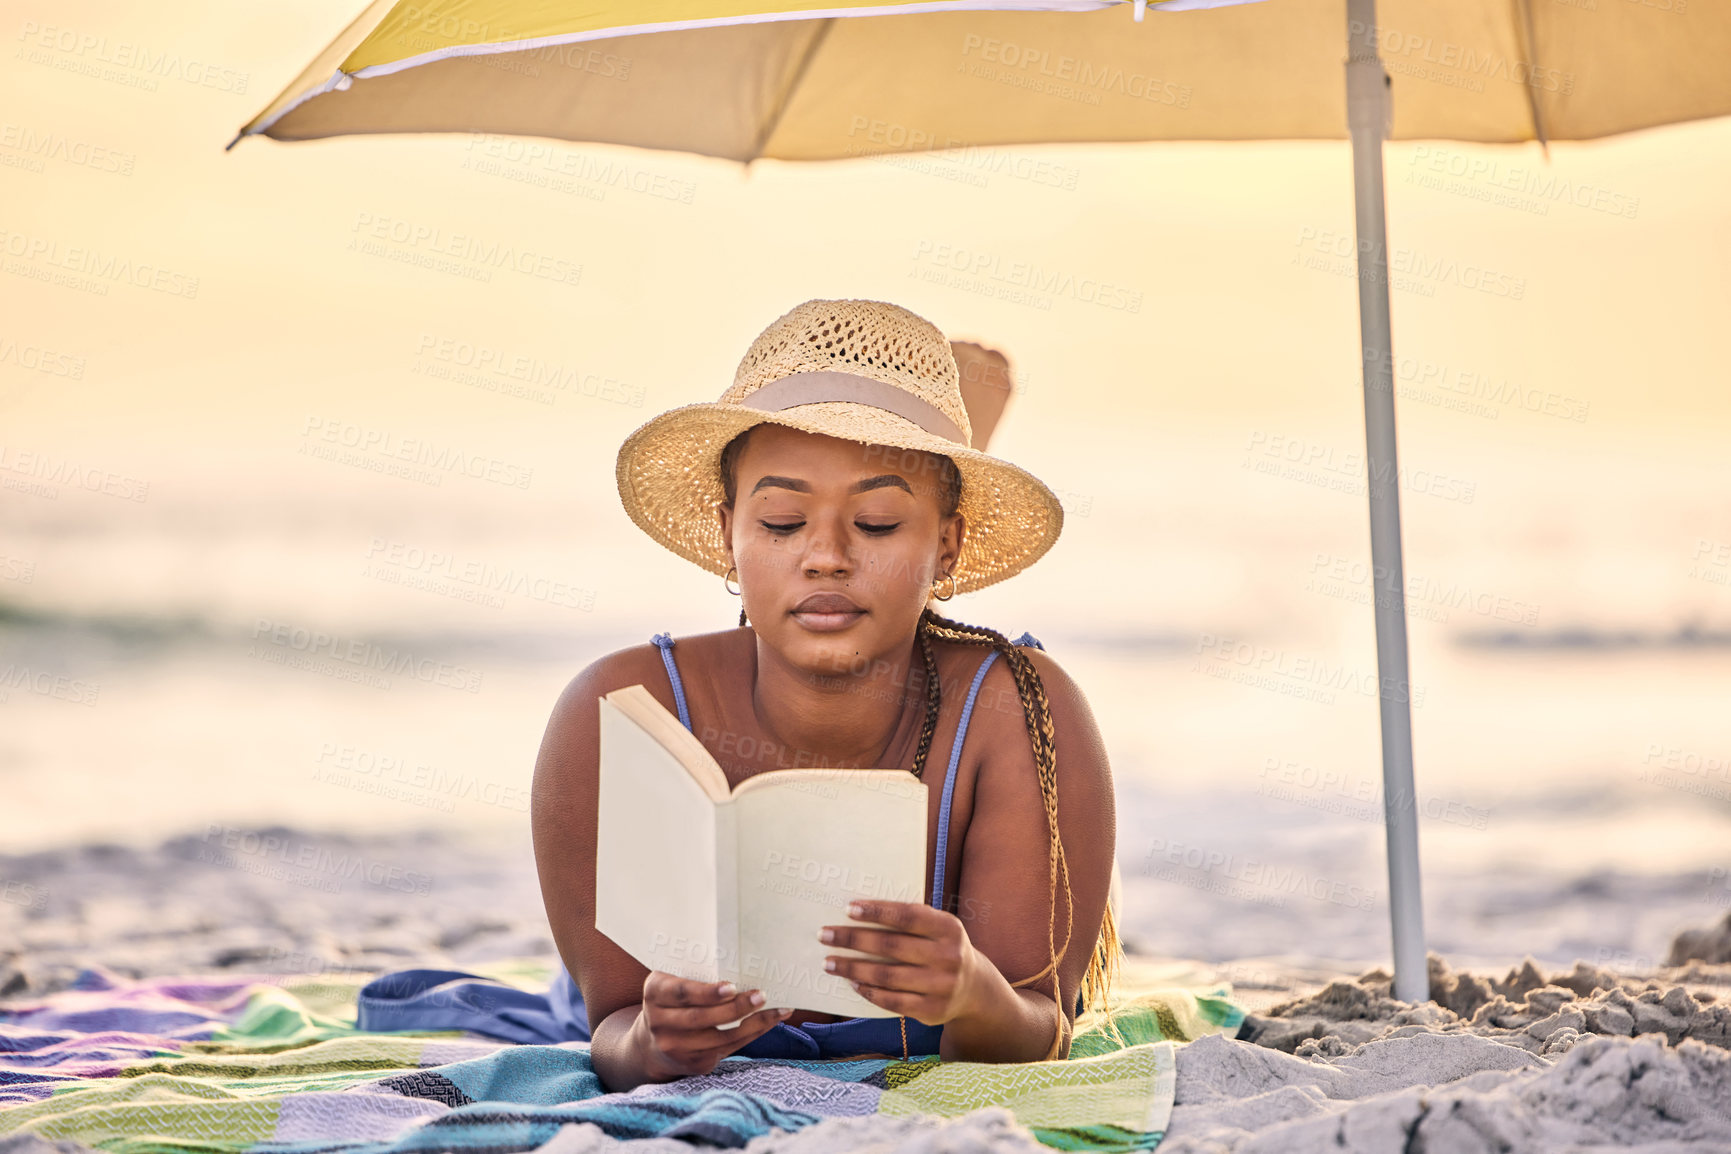 Buy stock photo Sunset, relax or black woman reading book at ocean for alone time, rest break or holiday vacation. Beach, travel or African person with fiction story or novel for knowledge, peace or hobby in Greece